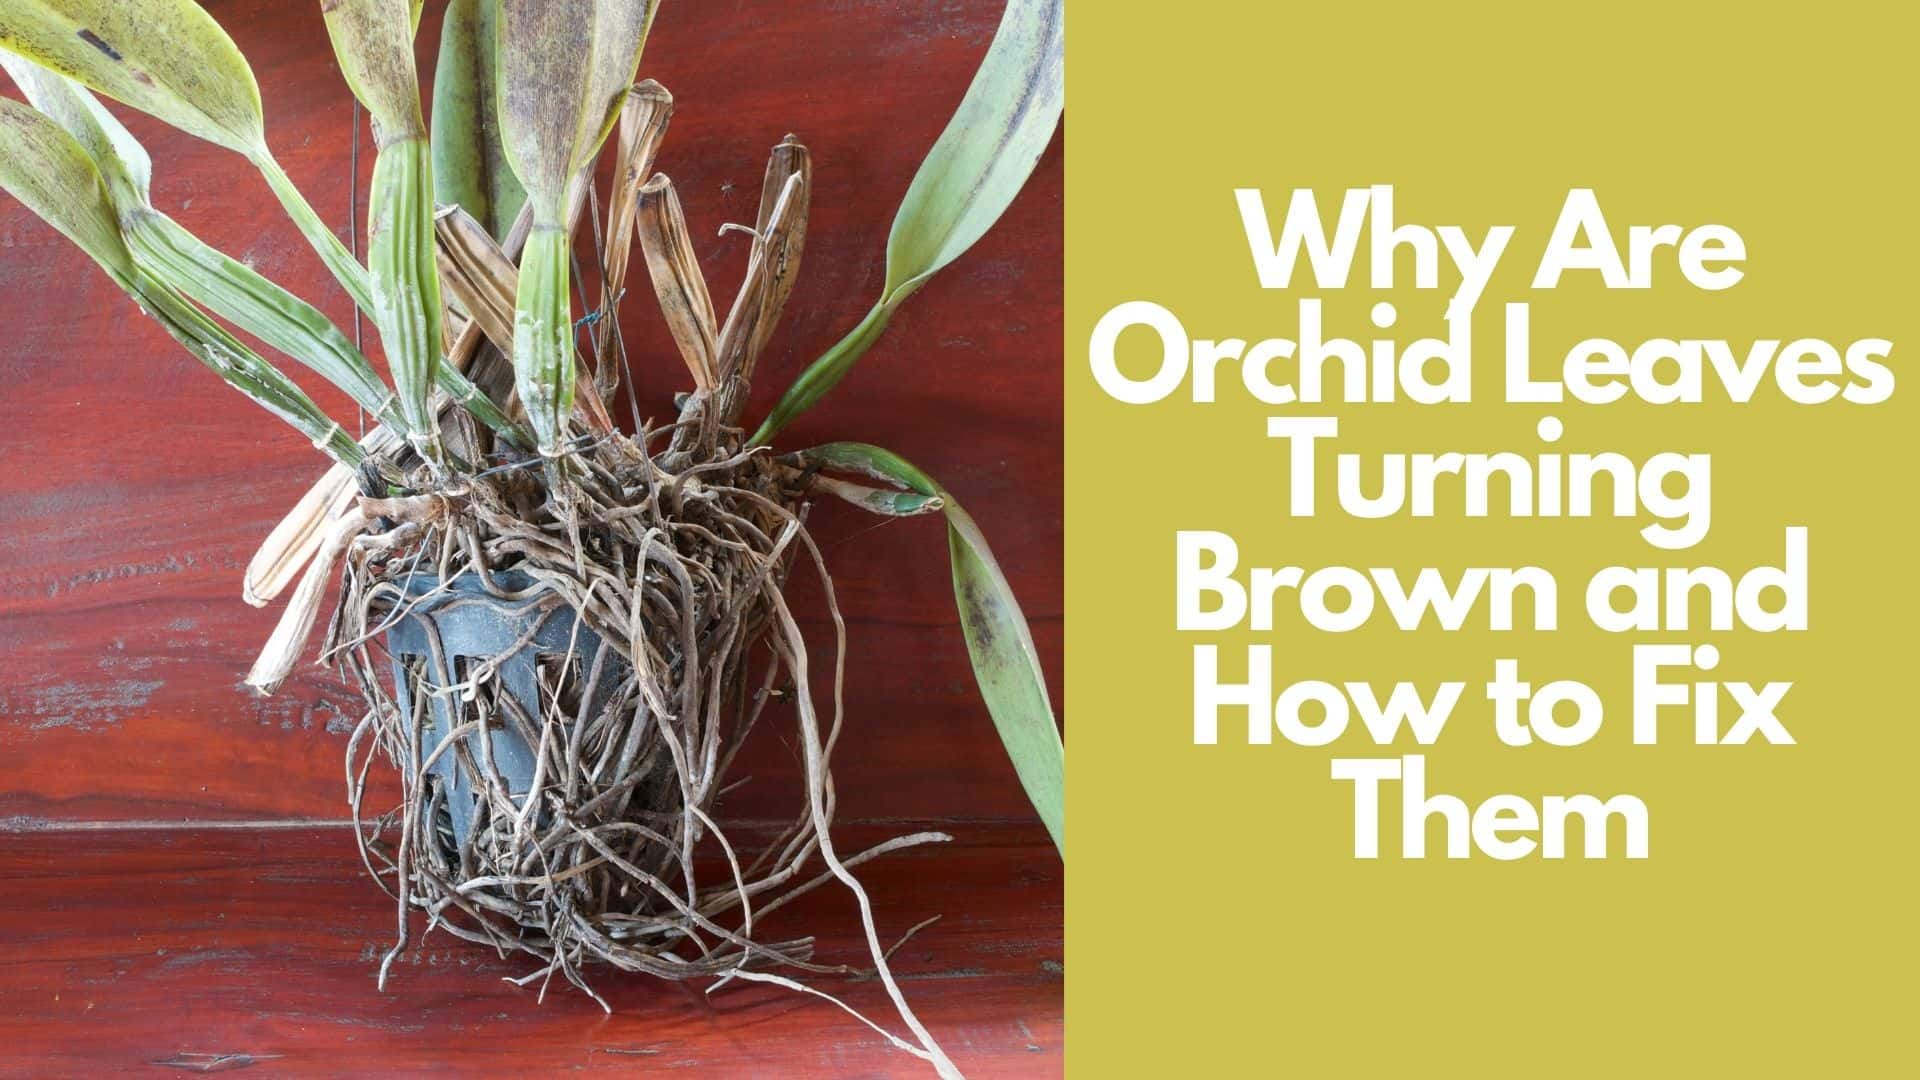 Why Are Orchid Leaves Turning Brown and How to Fix Them